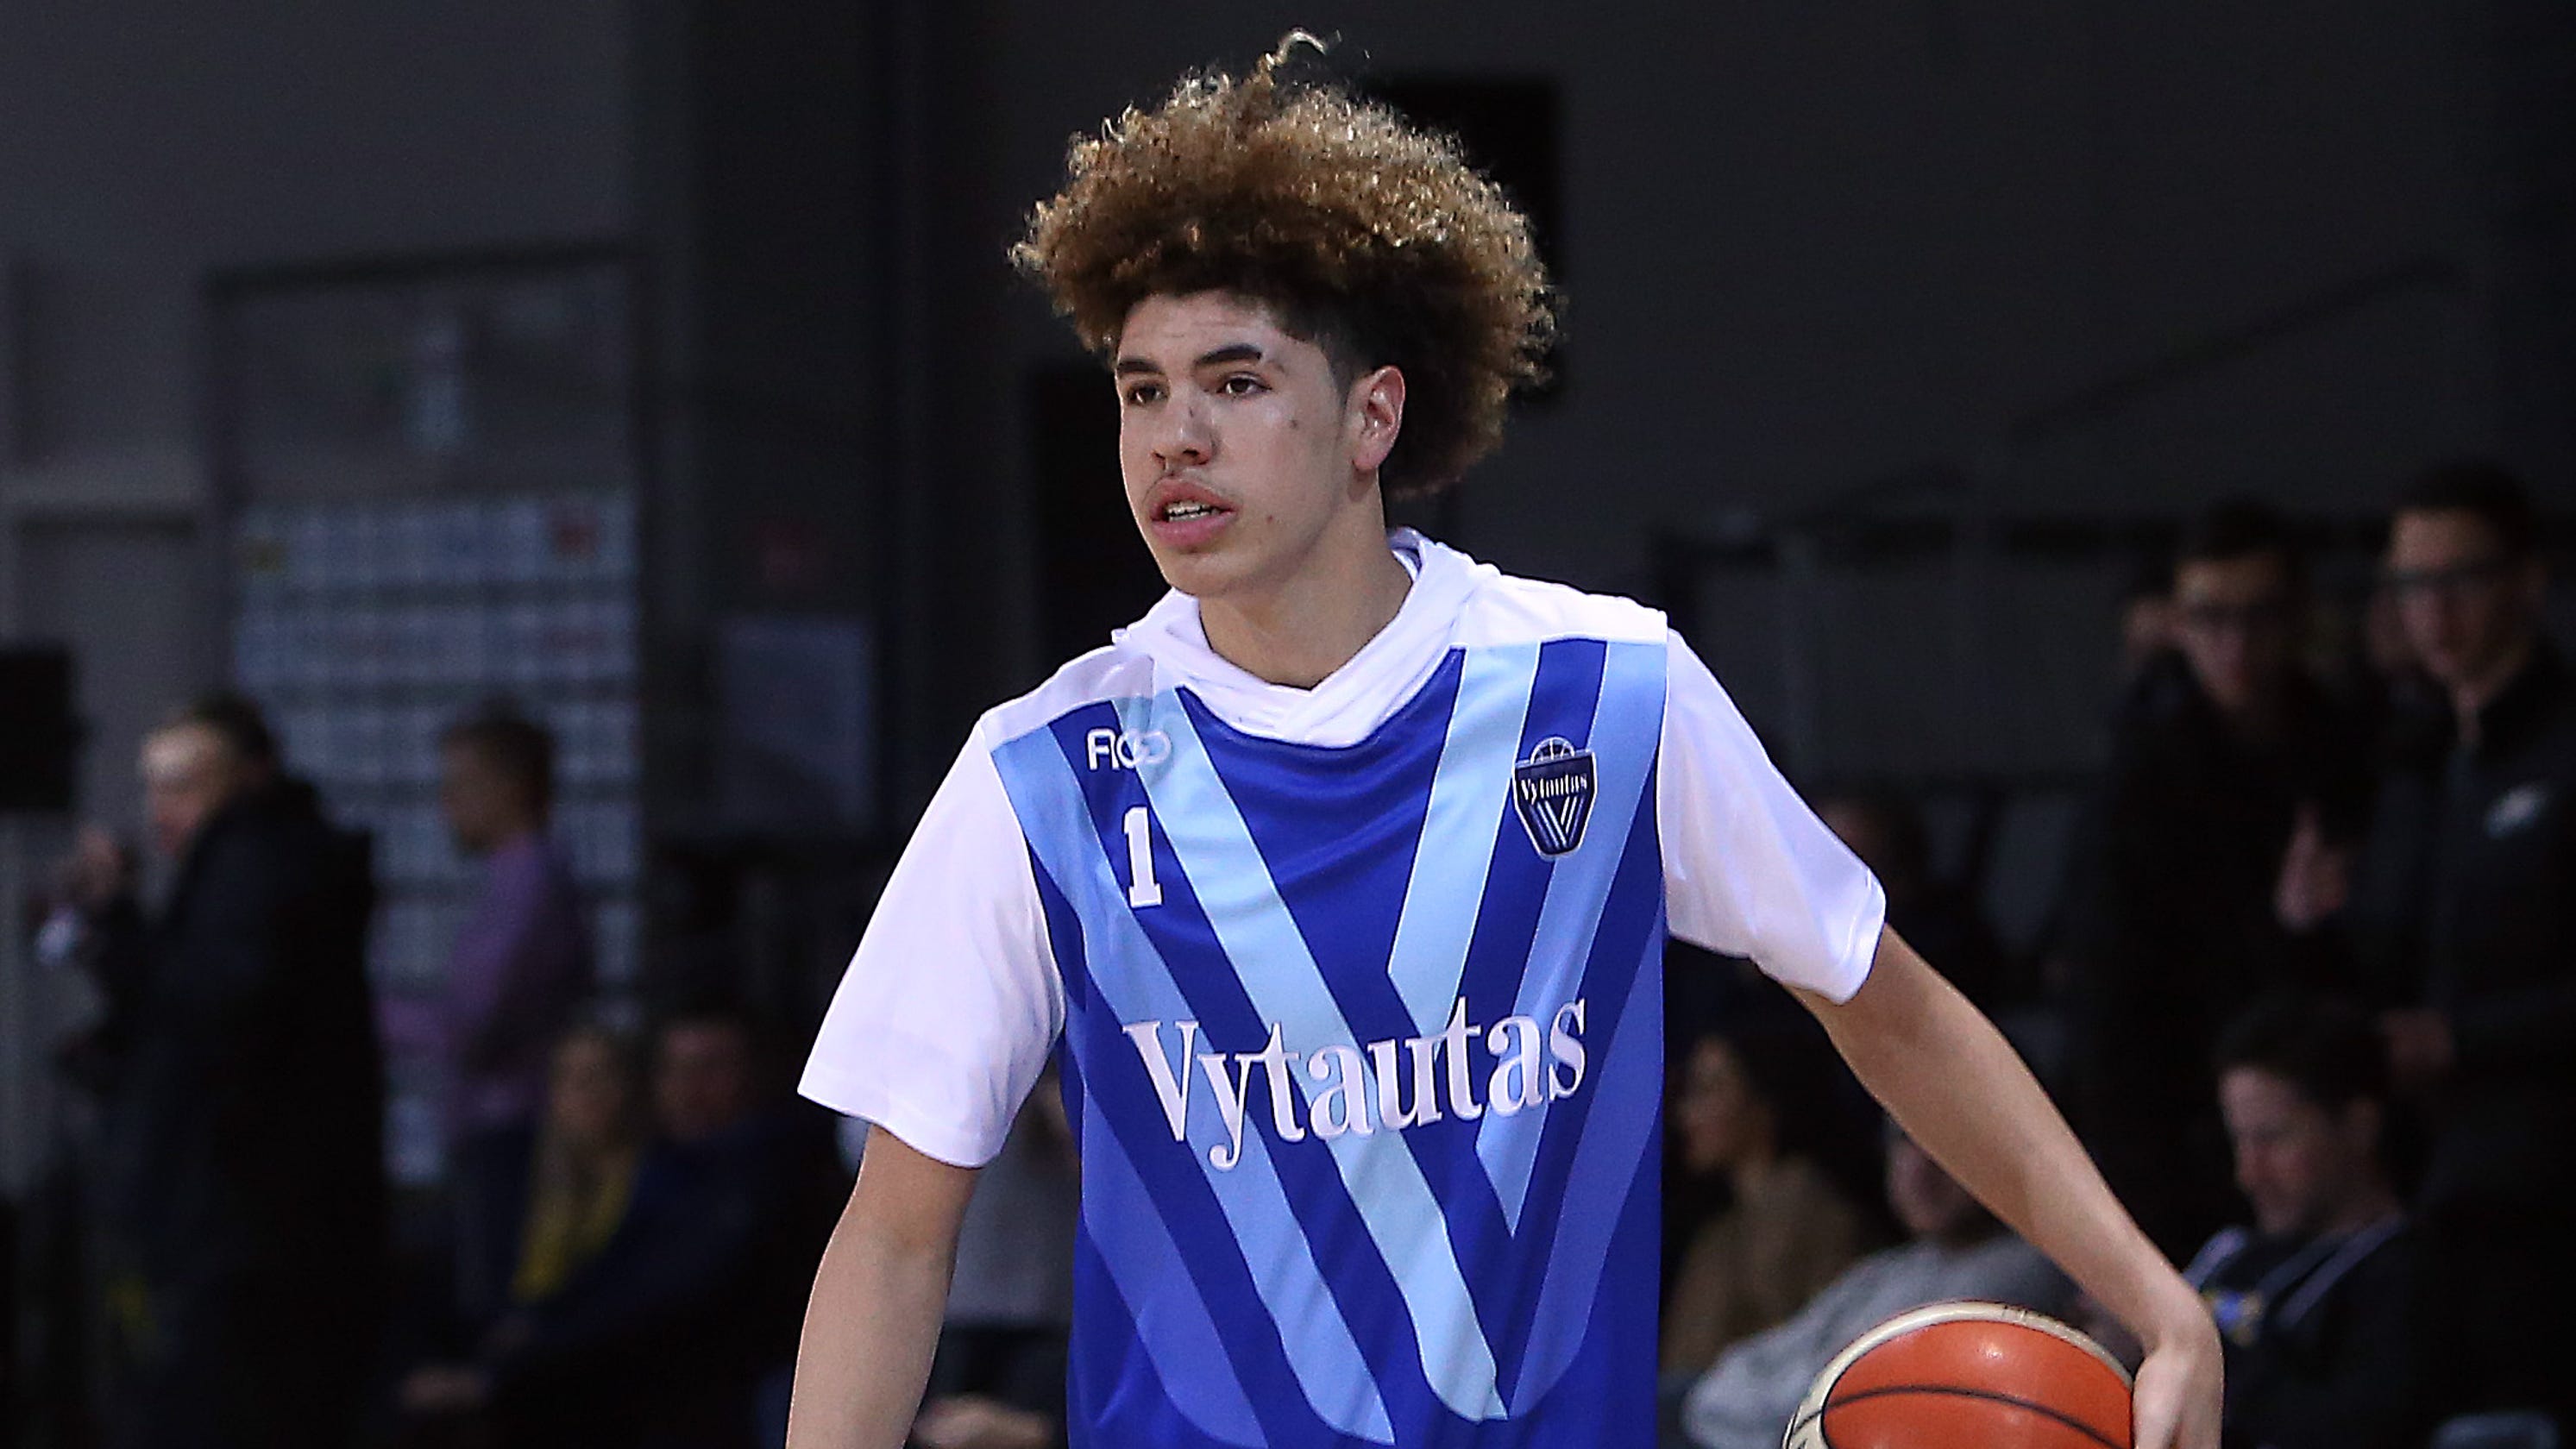 LaMelo Ball can be No. 1 draft pick, says ex-NBA player ...